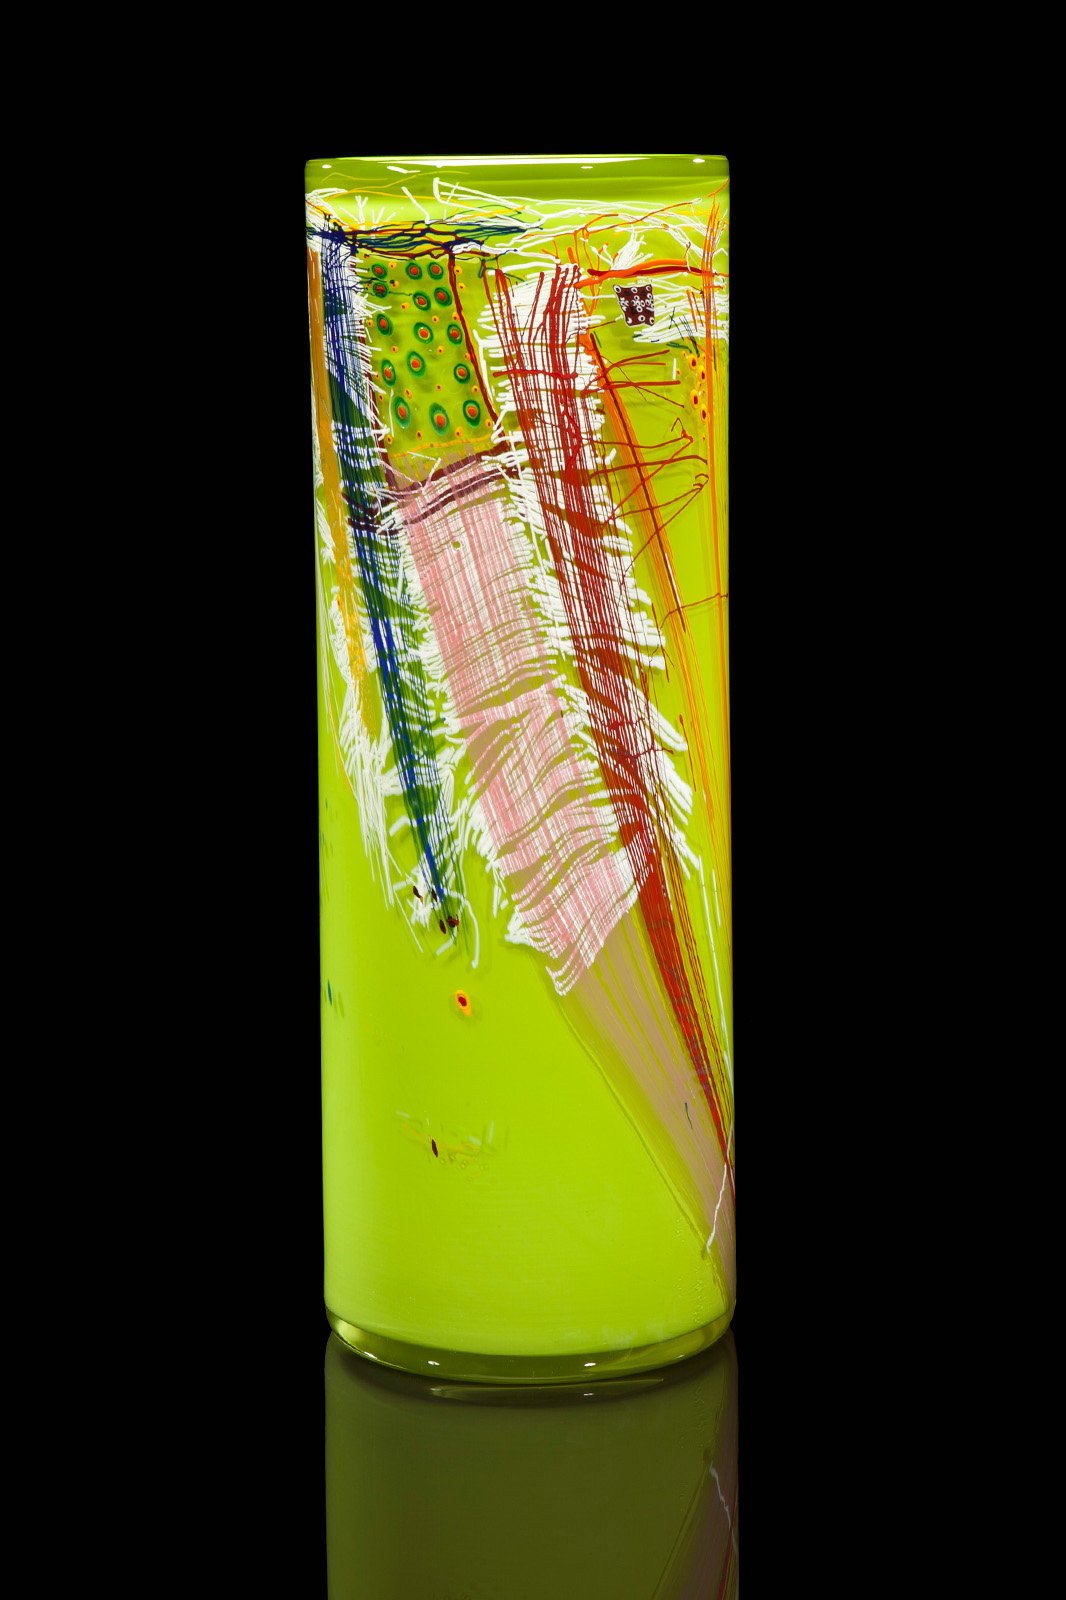 Dale Chihuly, Lime Green Blanket Cylinder, 2010